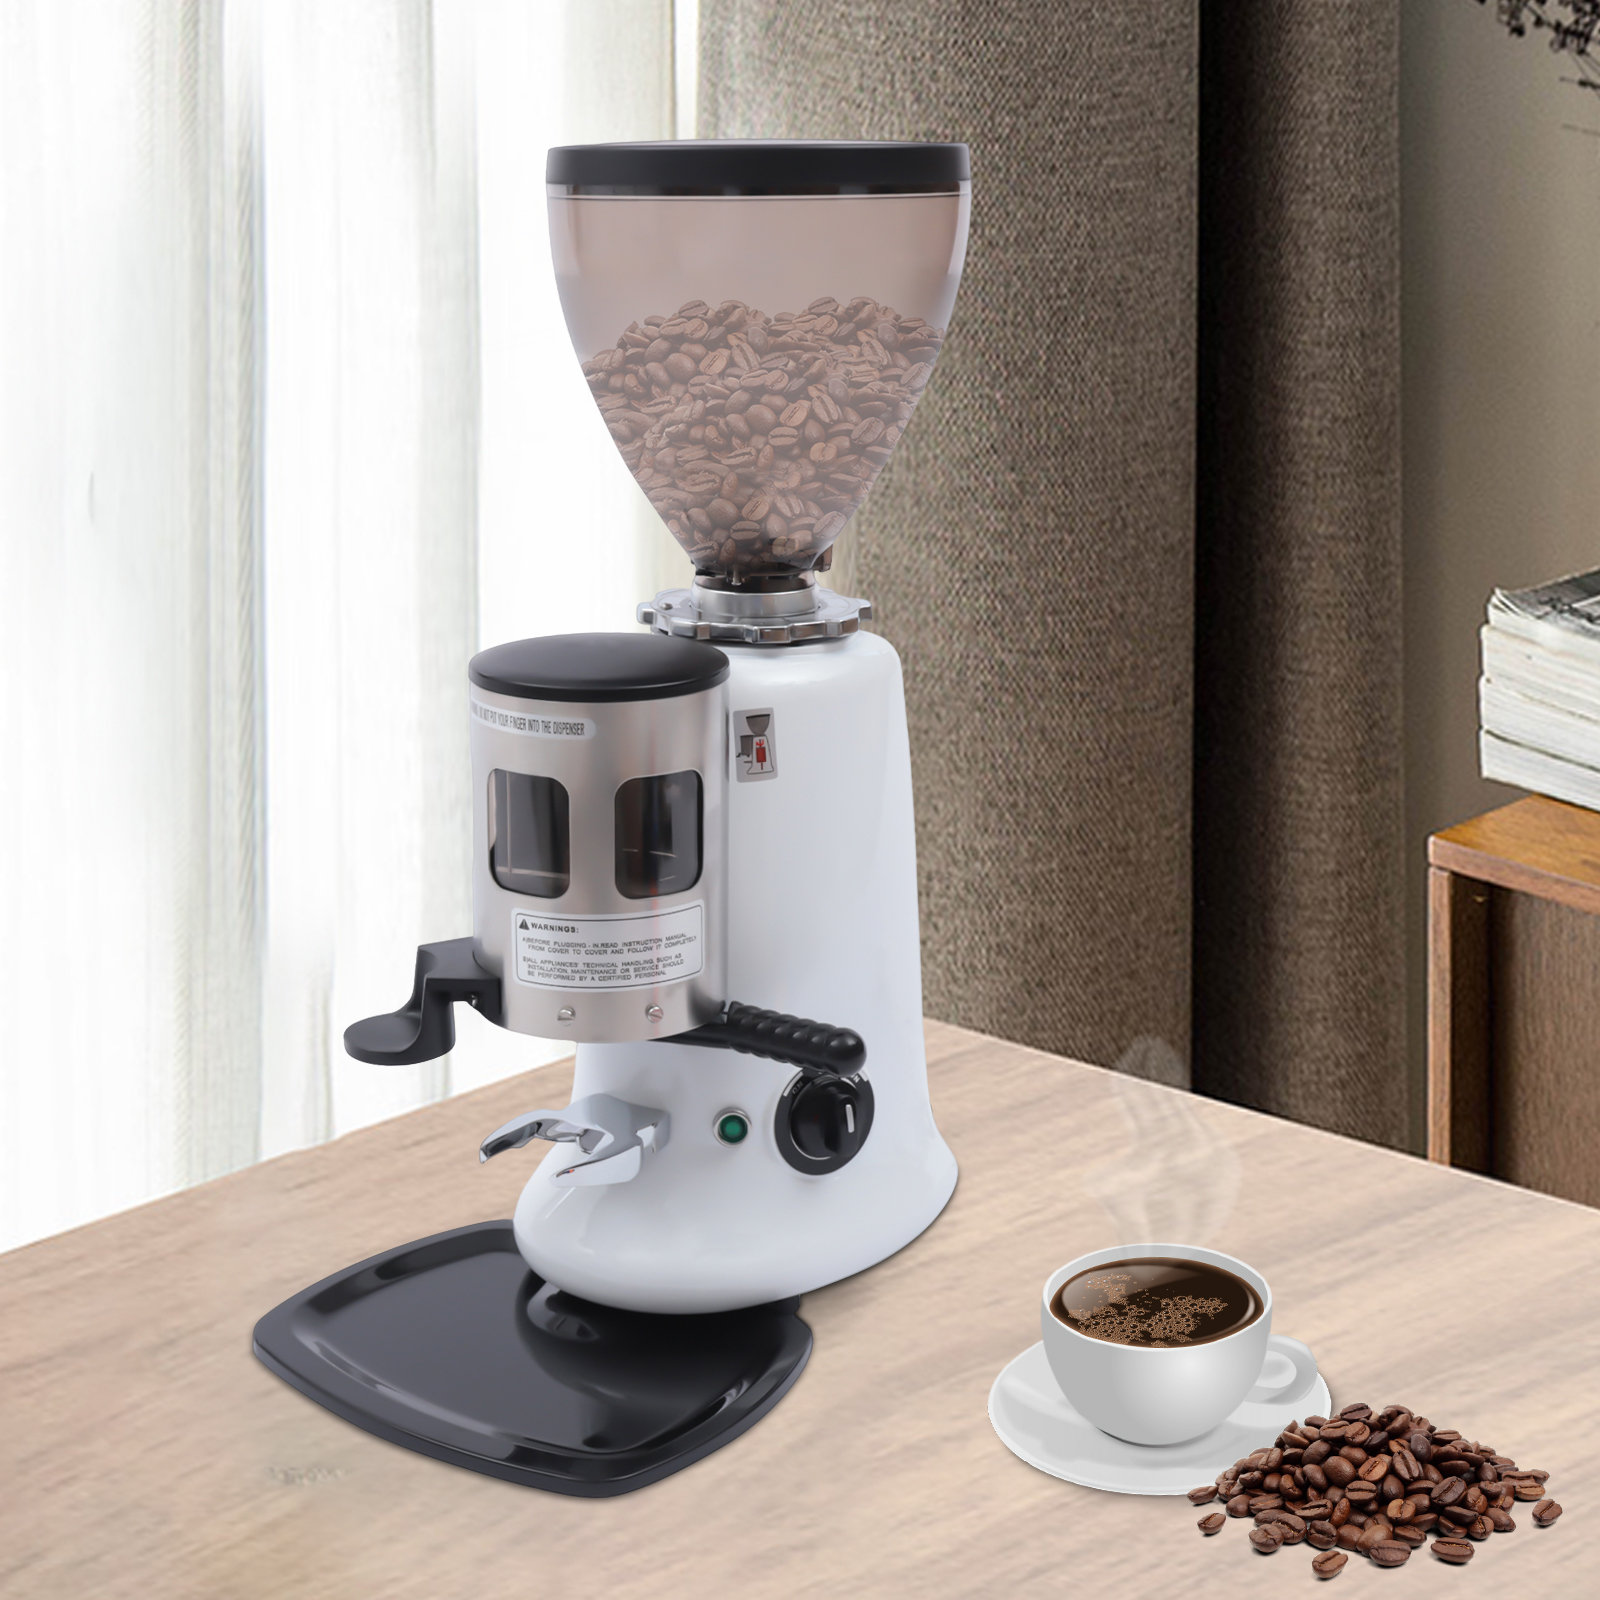 DeLonghi Dedica Conical Burr Coffee Grinder Stainless - Office Depot